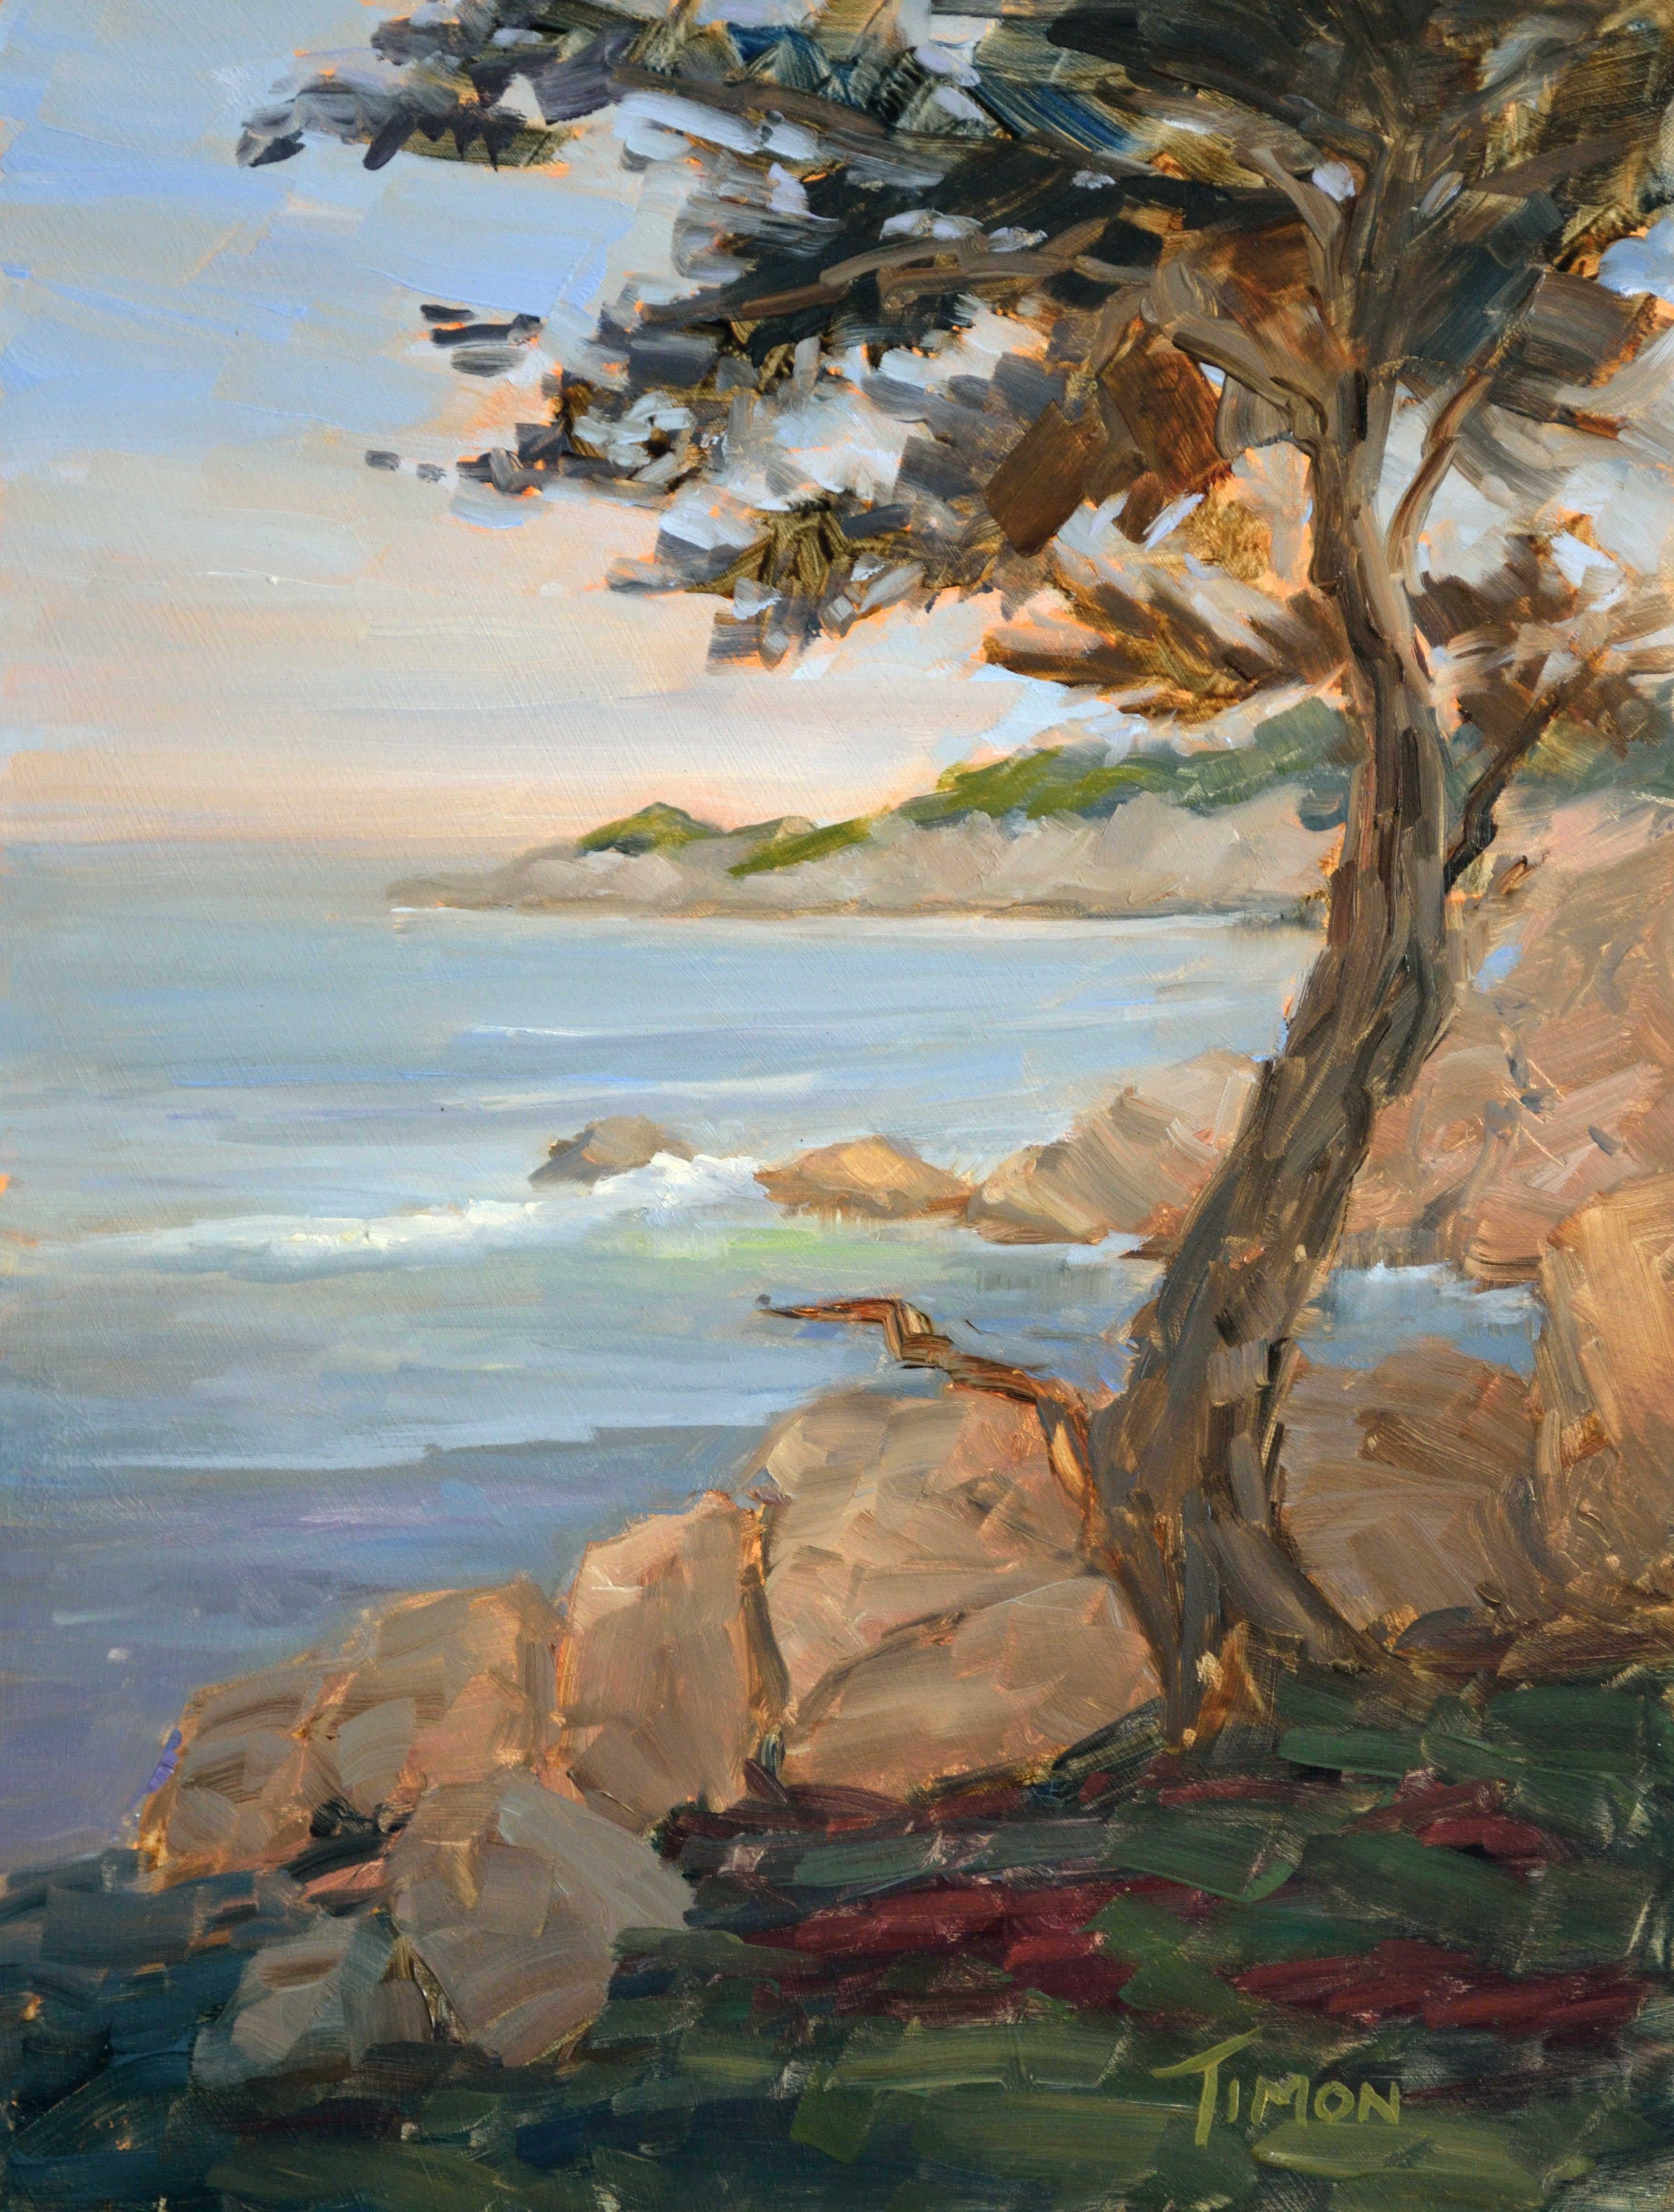 Off 17-Mile Drive, Painting, Oil on Canvas